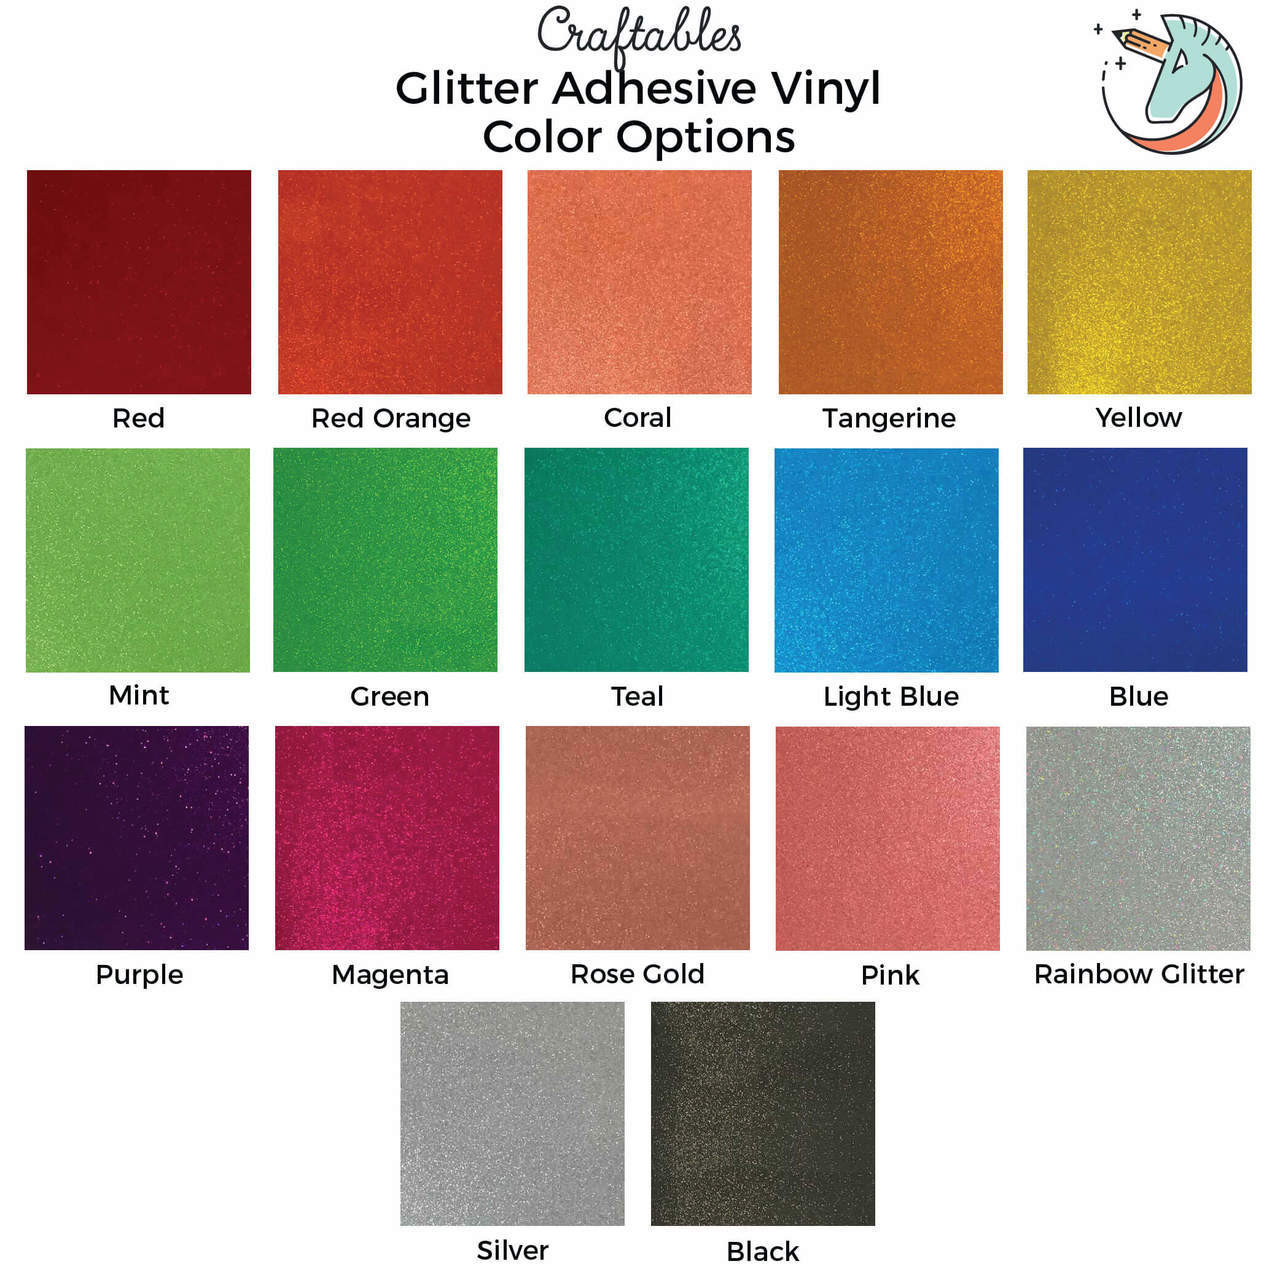 Red Glitter Adhesive Vinyl Sheets By Craftables